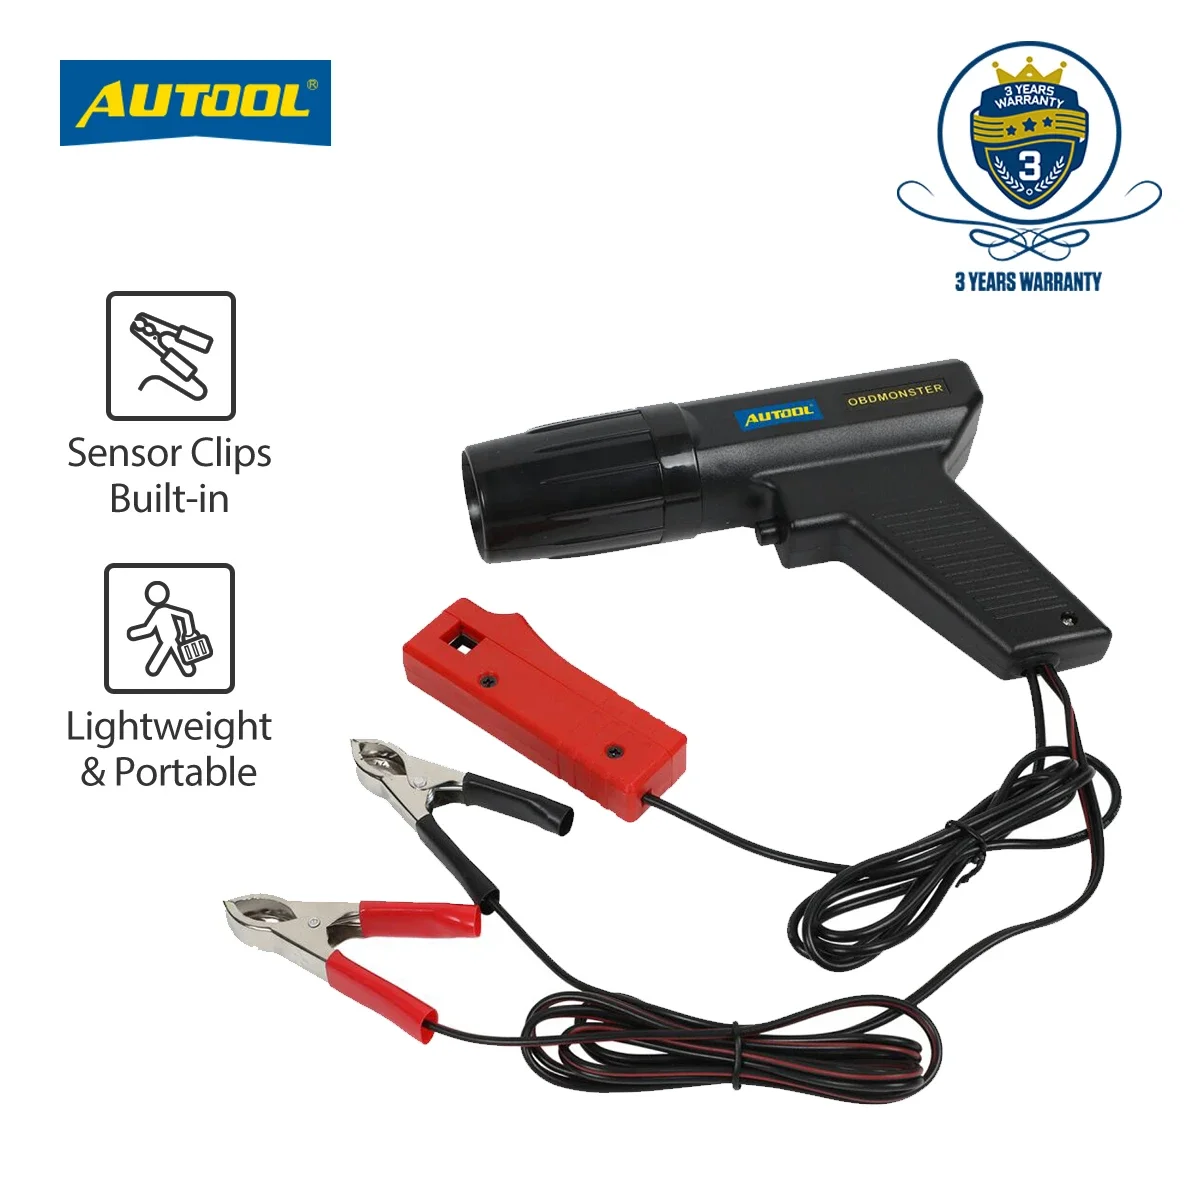 AUTOOL Portable Ignition Timing Light Gun Gasoline Engine Ignition Timing Tool Strobe Lamp Detector Motorcycle Car Repair Tools